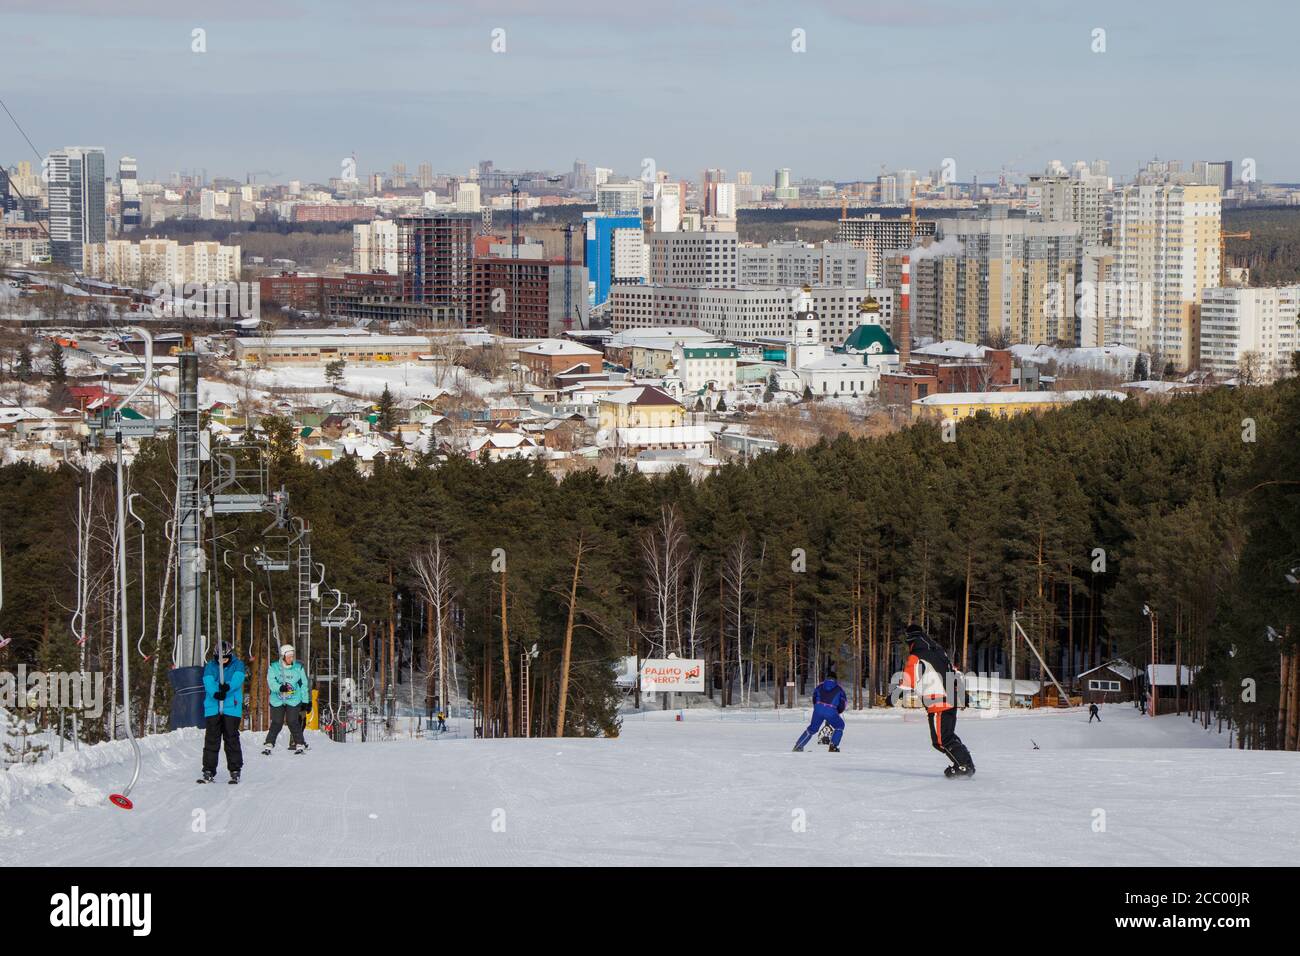 People on the ski slope and view of the city of Yekaterinburg Stock Photo